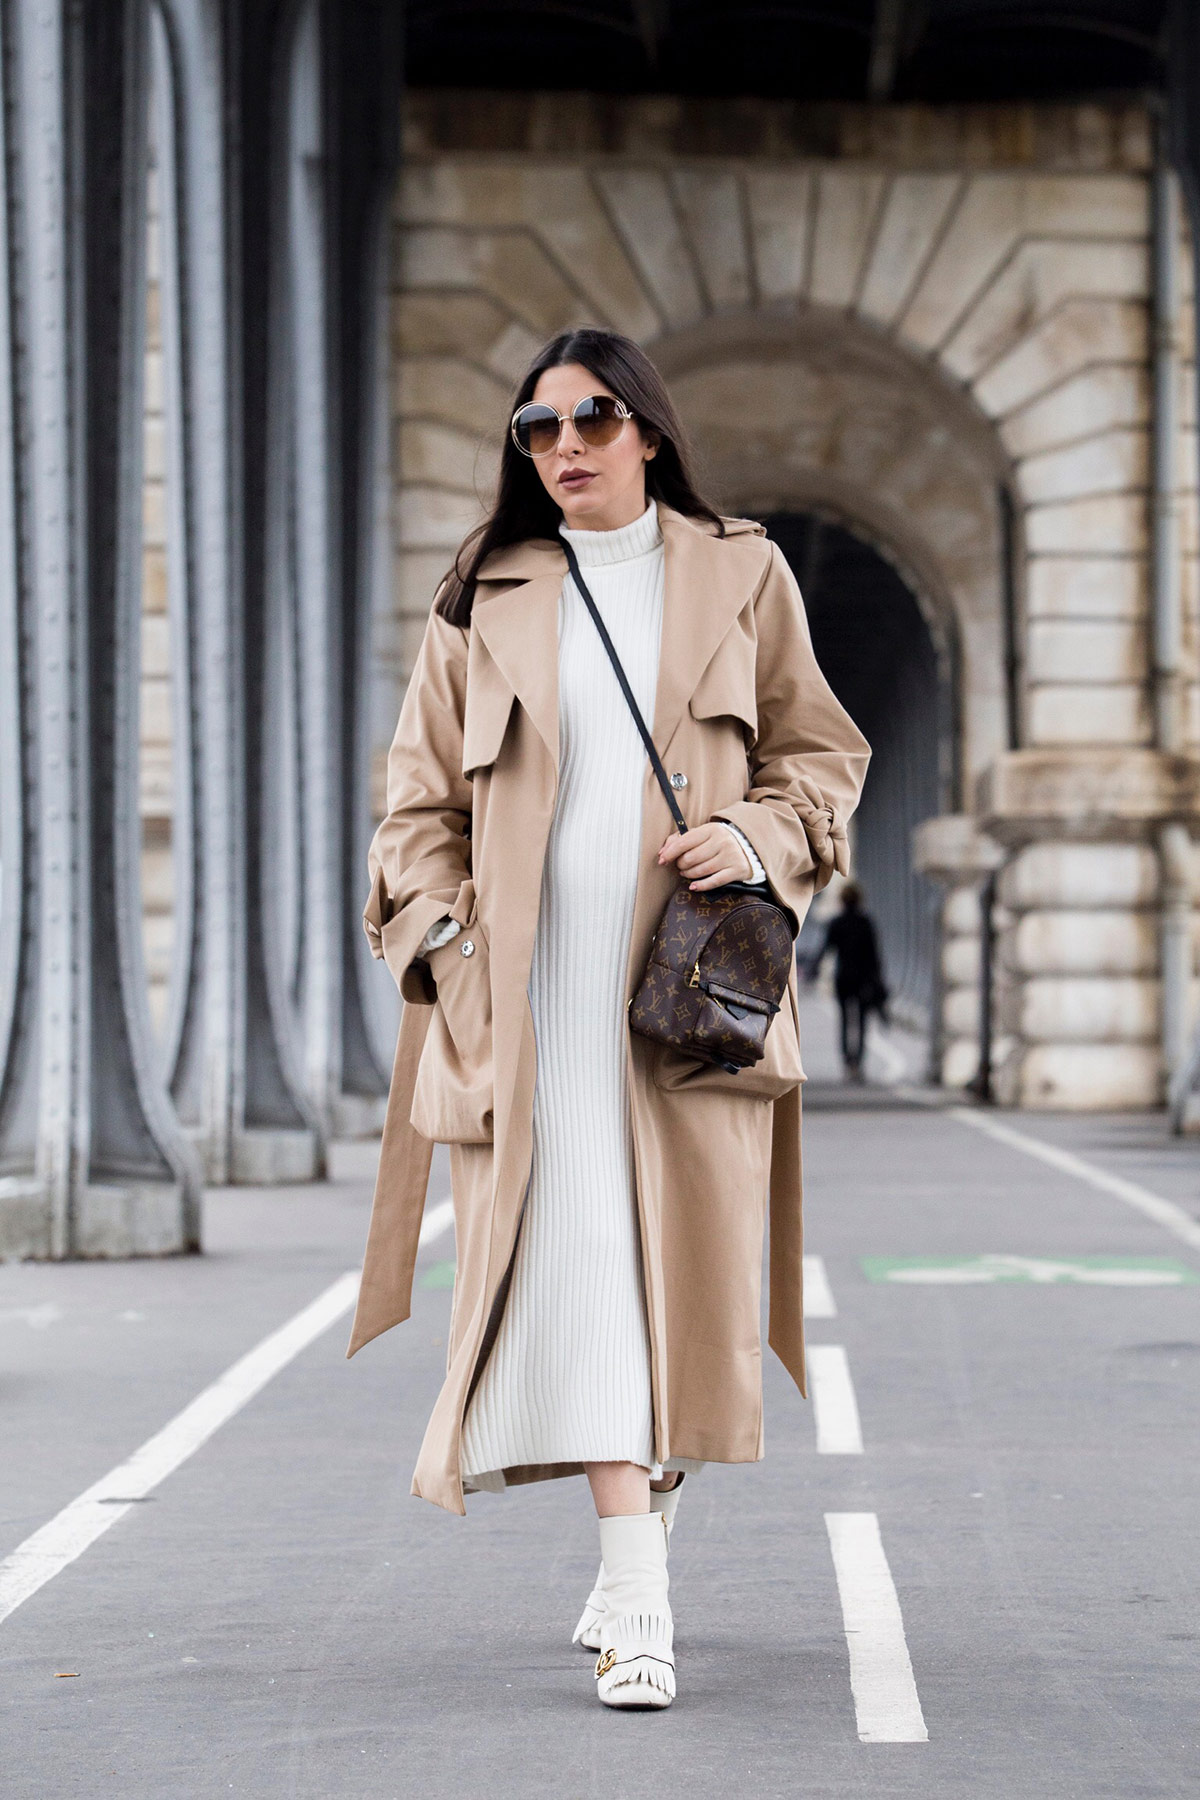 Maje ecru turtleneck dress for fall worn with camel trench coat, Gucci Marmot boots and Louis Vuitton palm springs backpack by Stella Asteria - Fashion & Lifestyle Blogger in Paris - Paris Street Style & Pregnancy Style inspiration